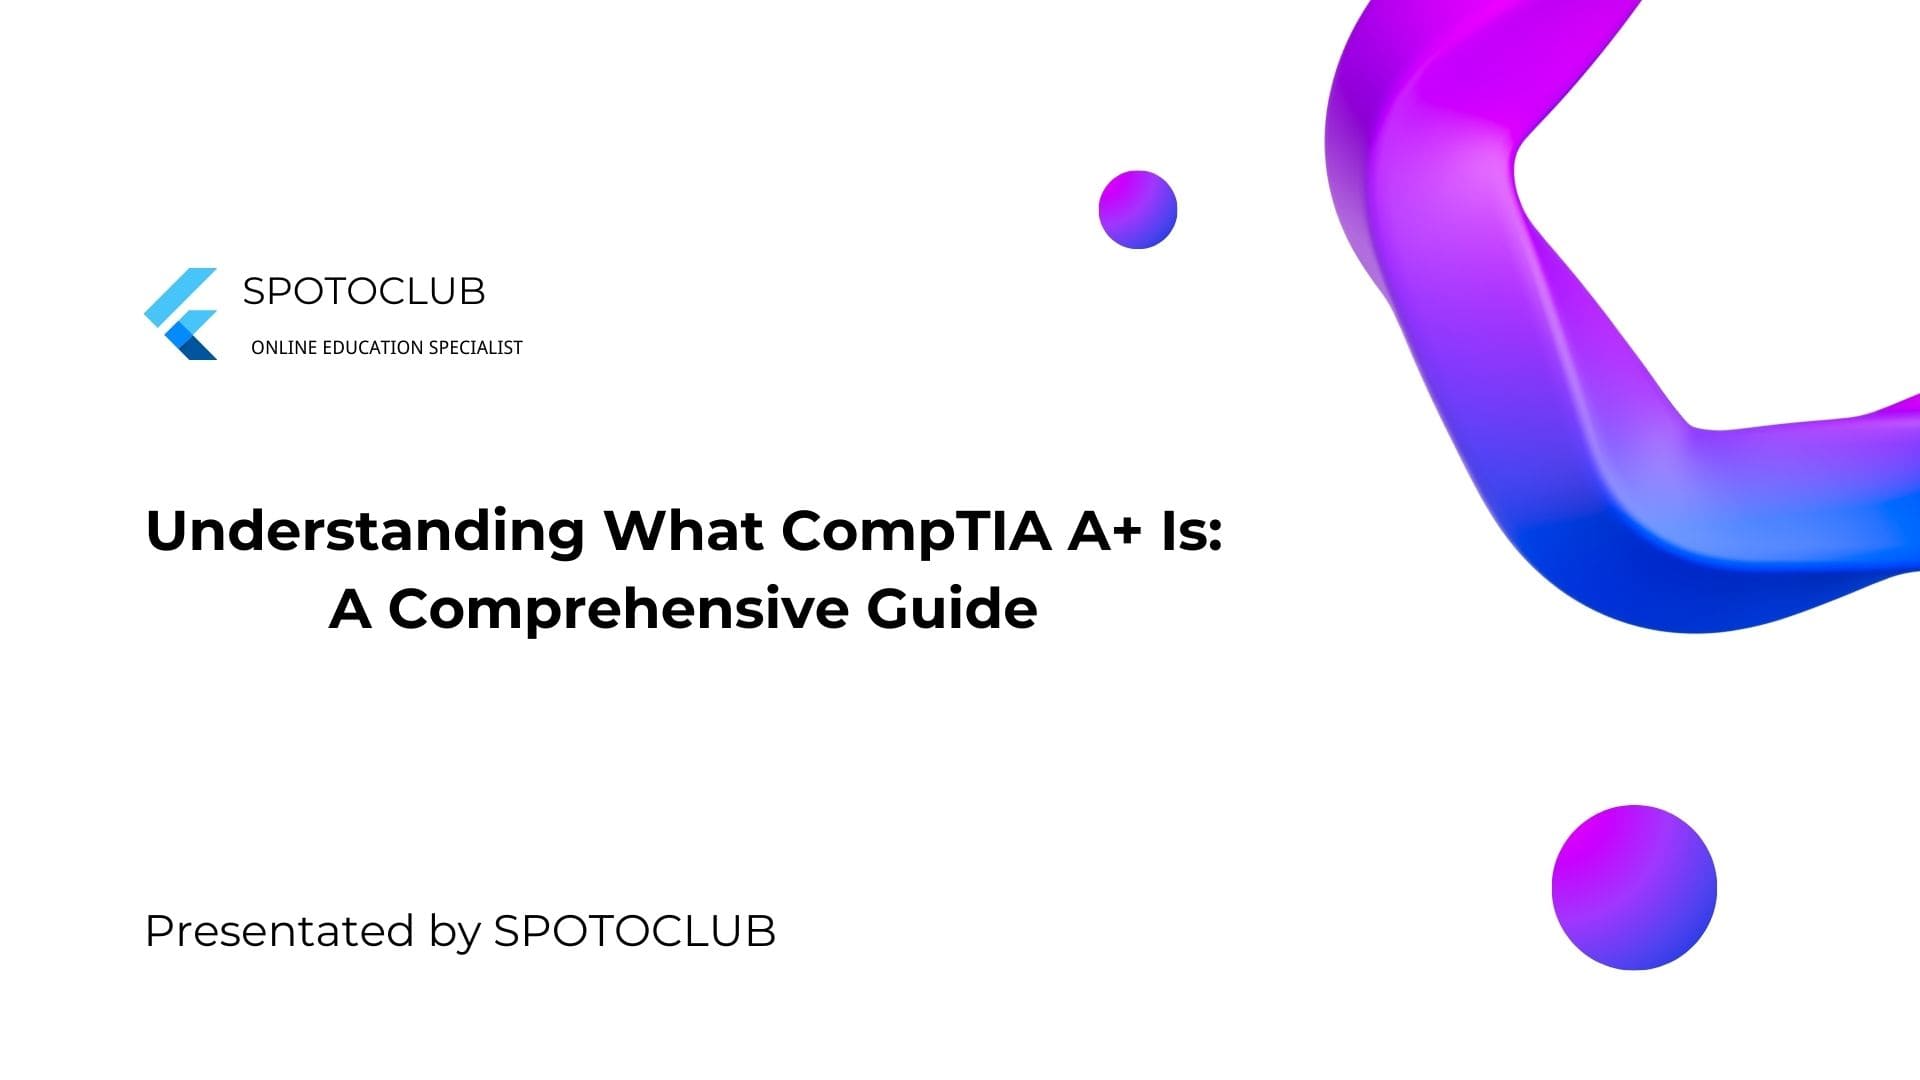 What CompTIA A+ Is: A Comprehensive Guide